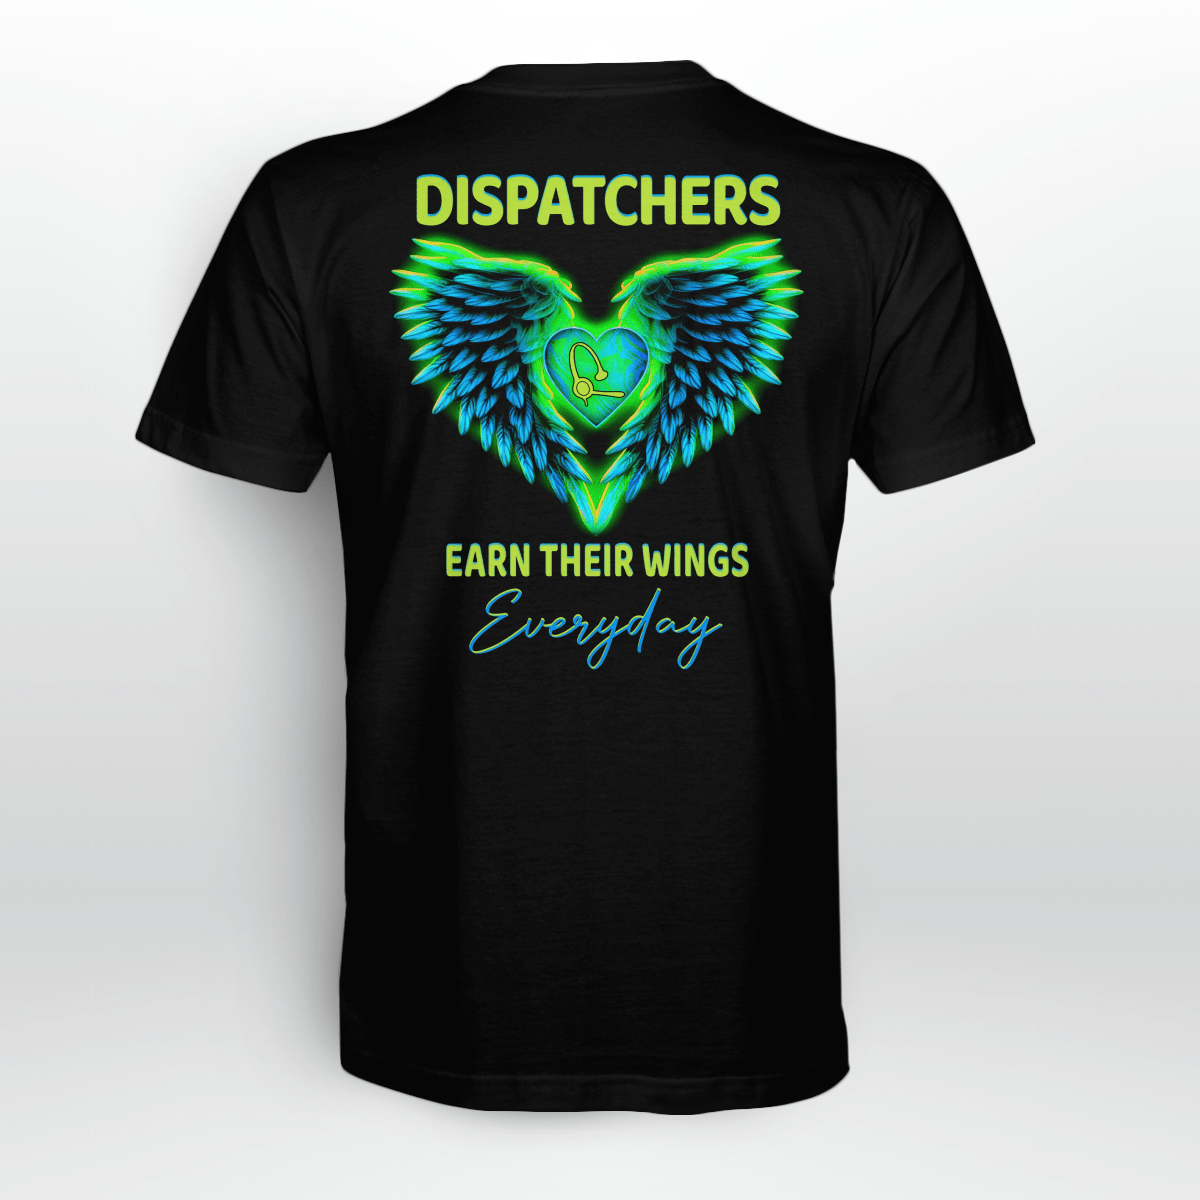 Dispatcher Earn Their Wings Everyday-T-Shirt -#F260523EARTH14BDISPZ2